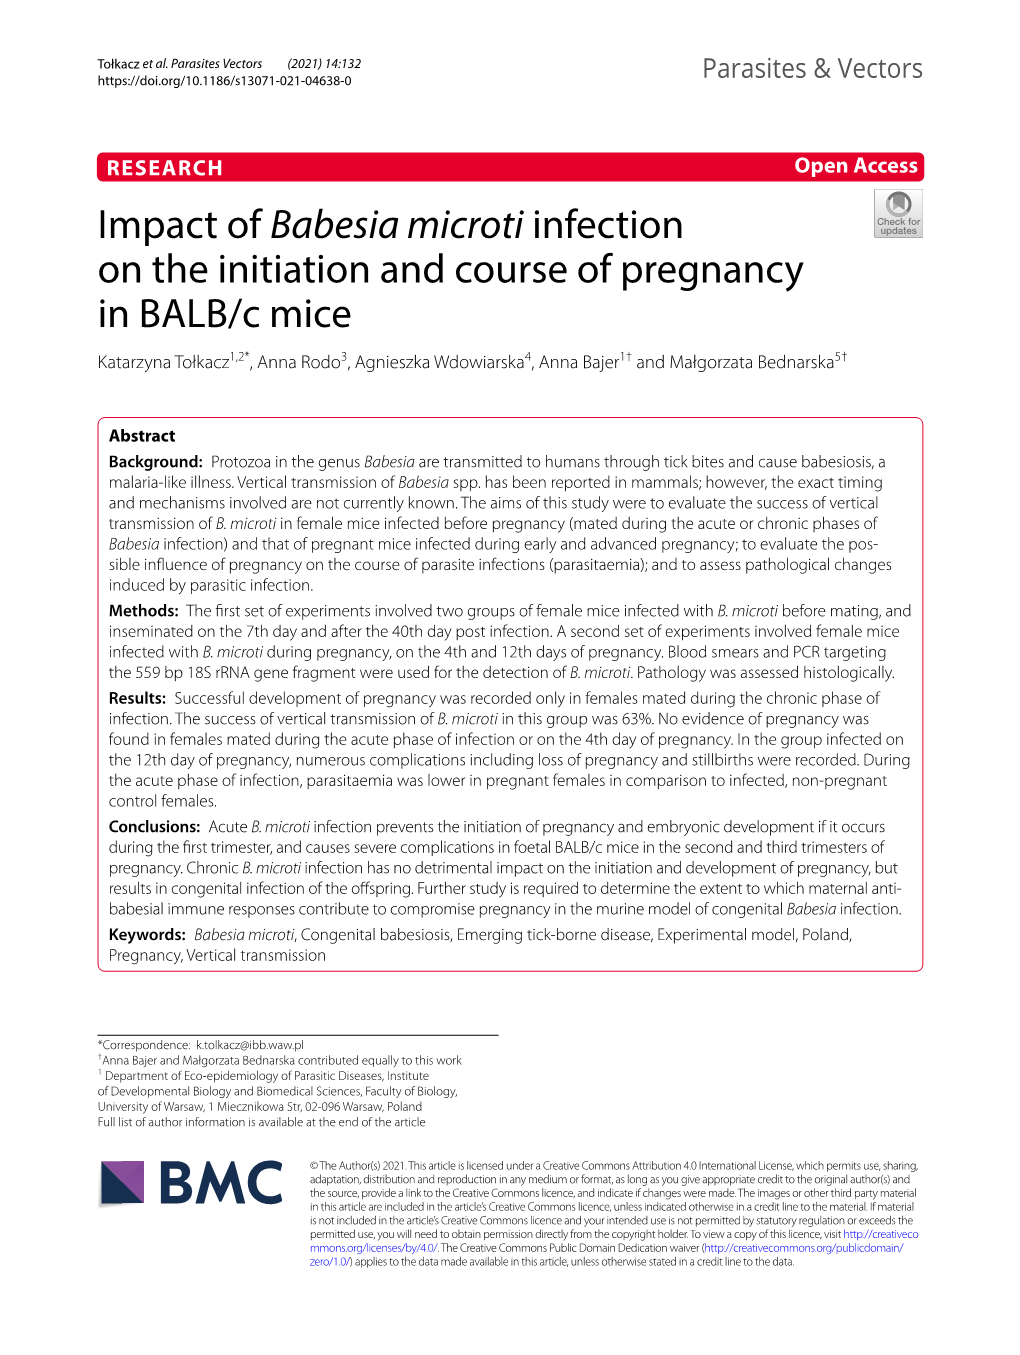 Impact of Babesia Microti Infection on the Initiation and Course Of